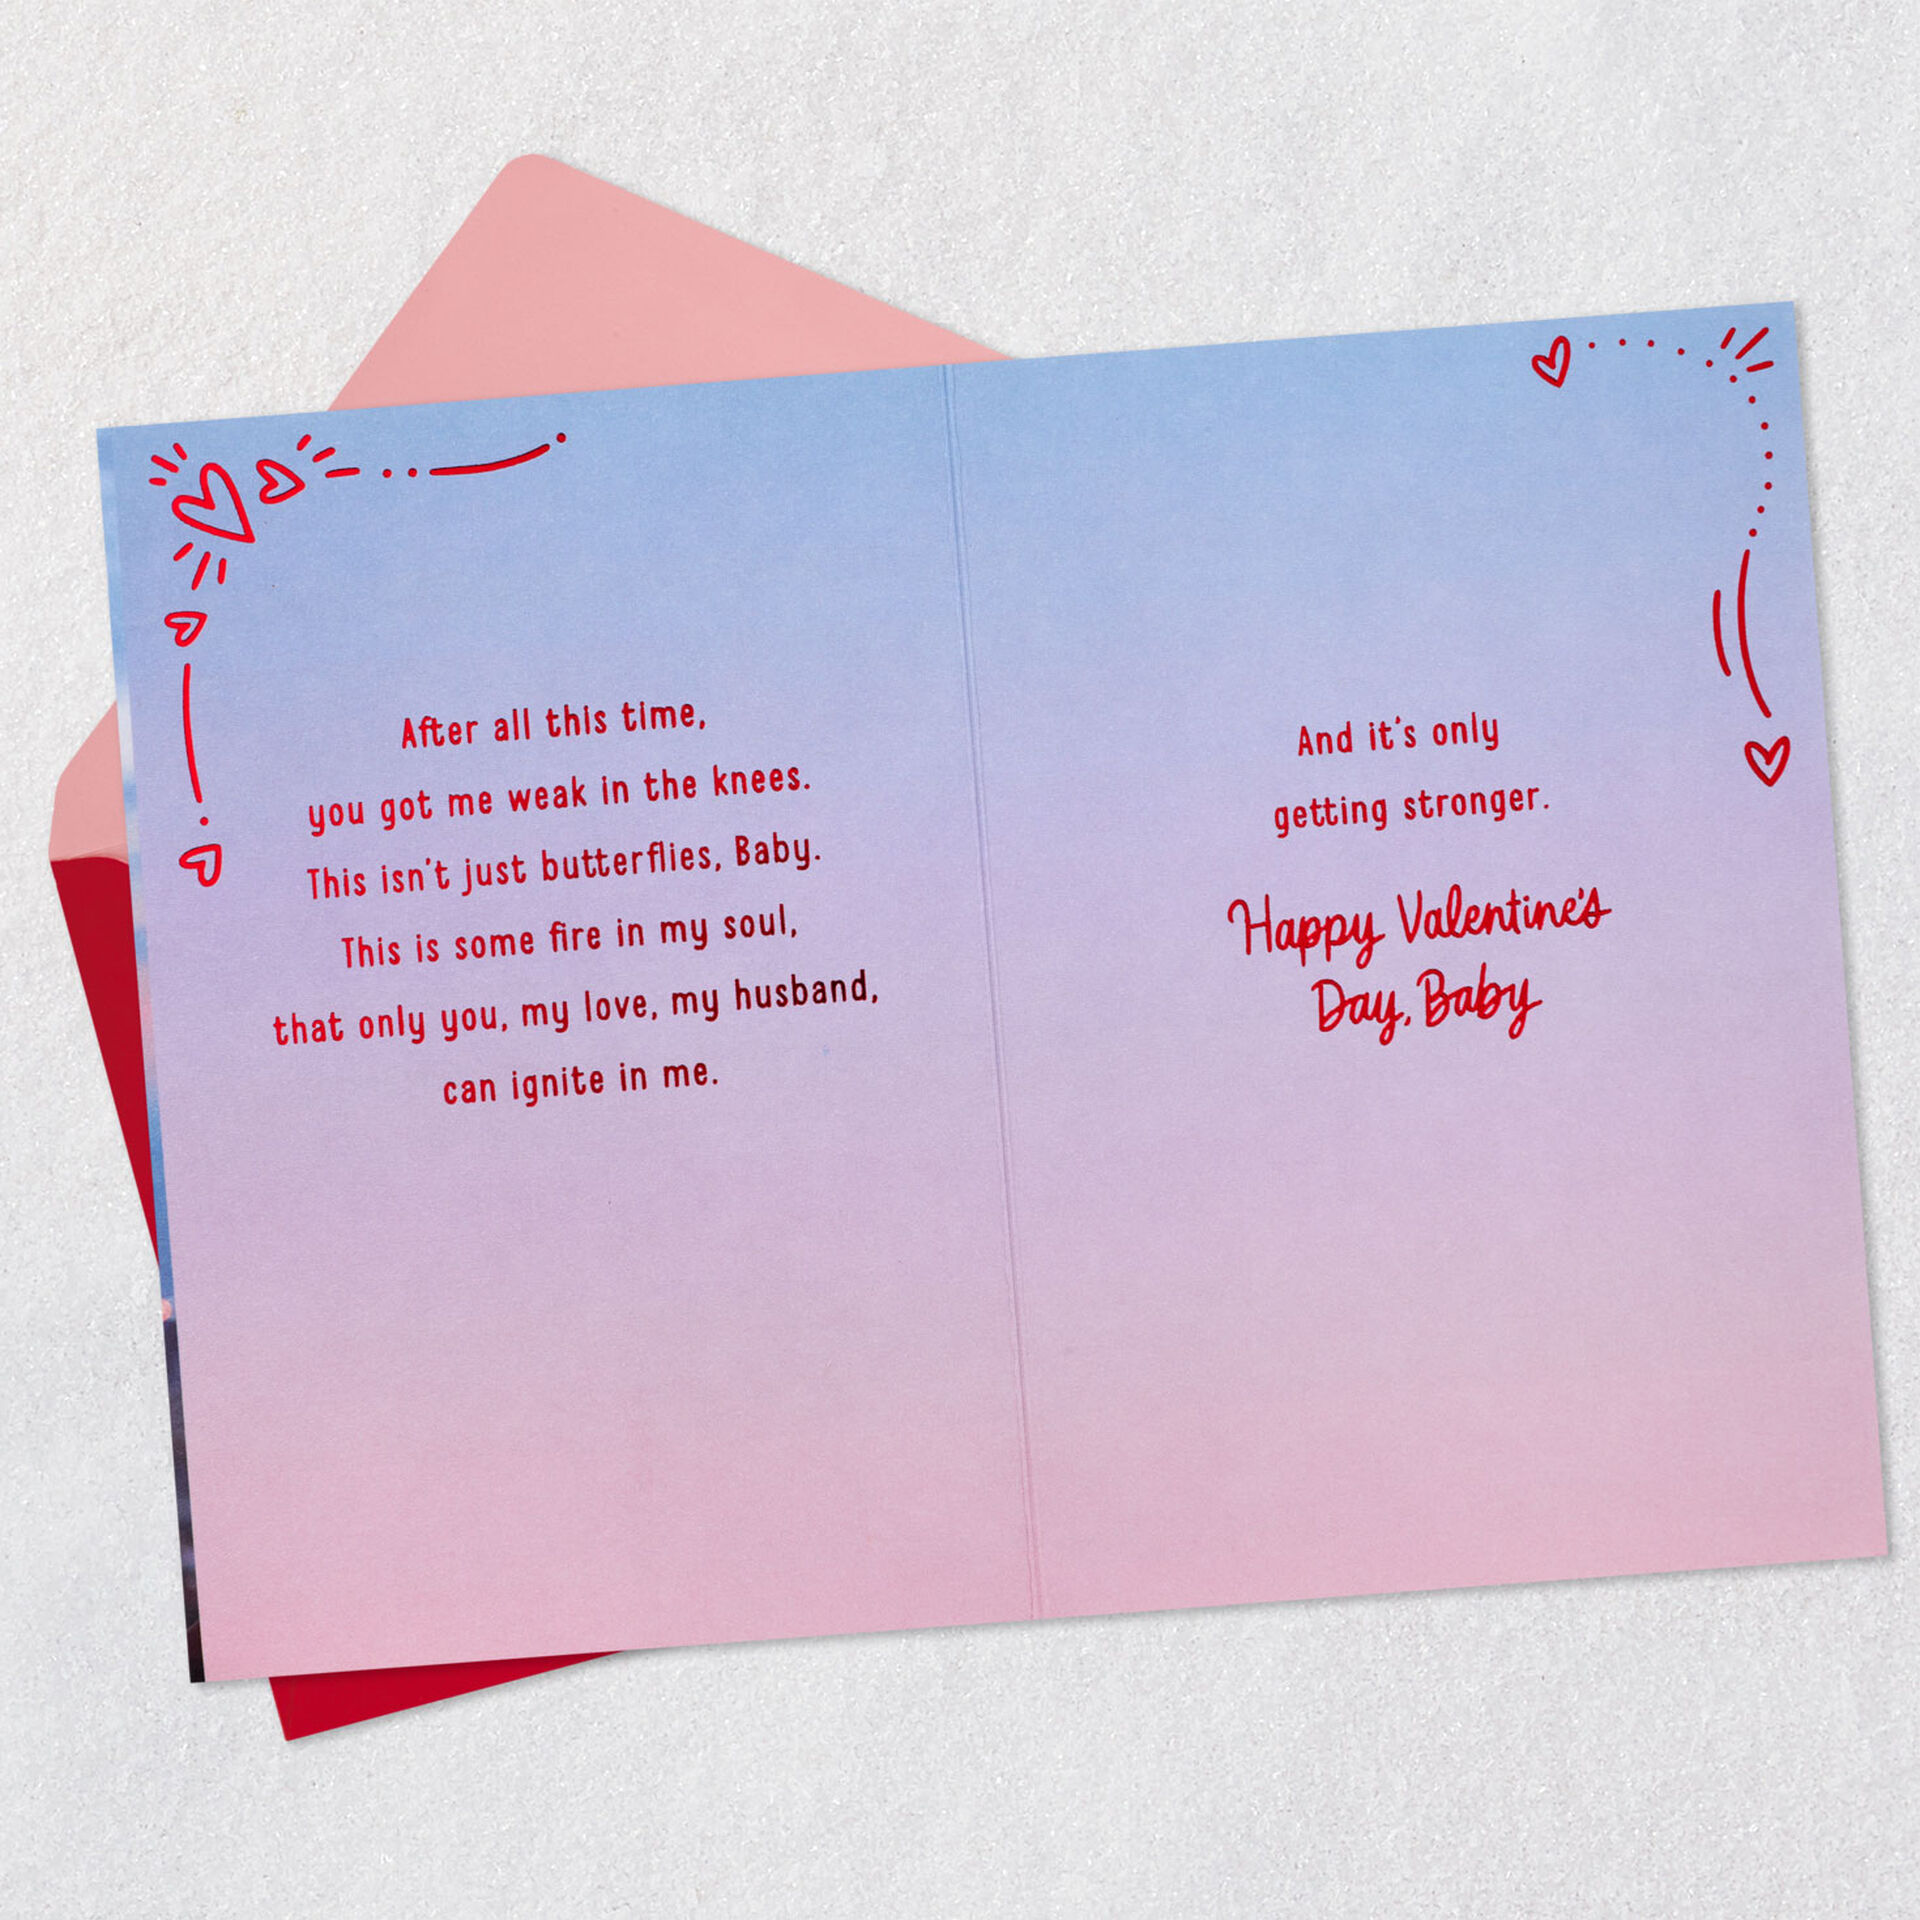 Couple-Kissing-Husband-Valentines-Day-Card_559SV4069_04